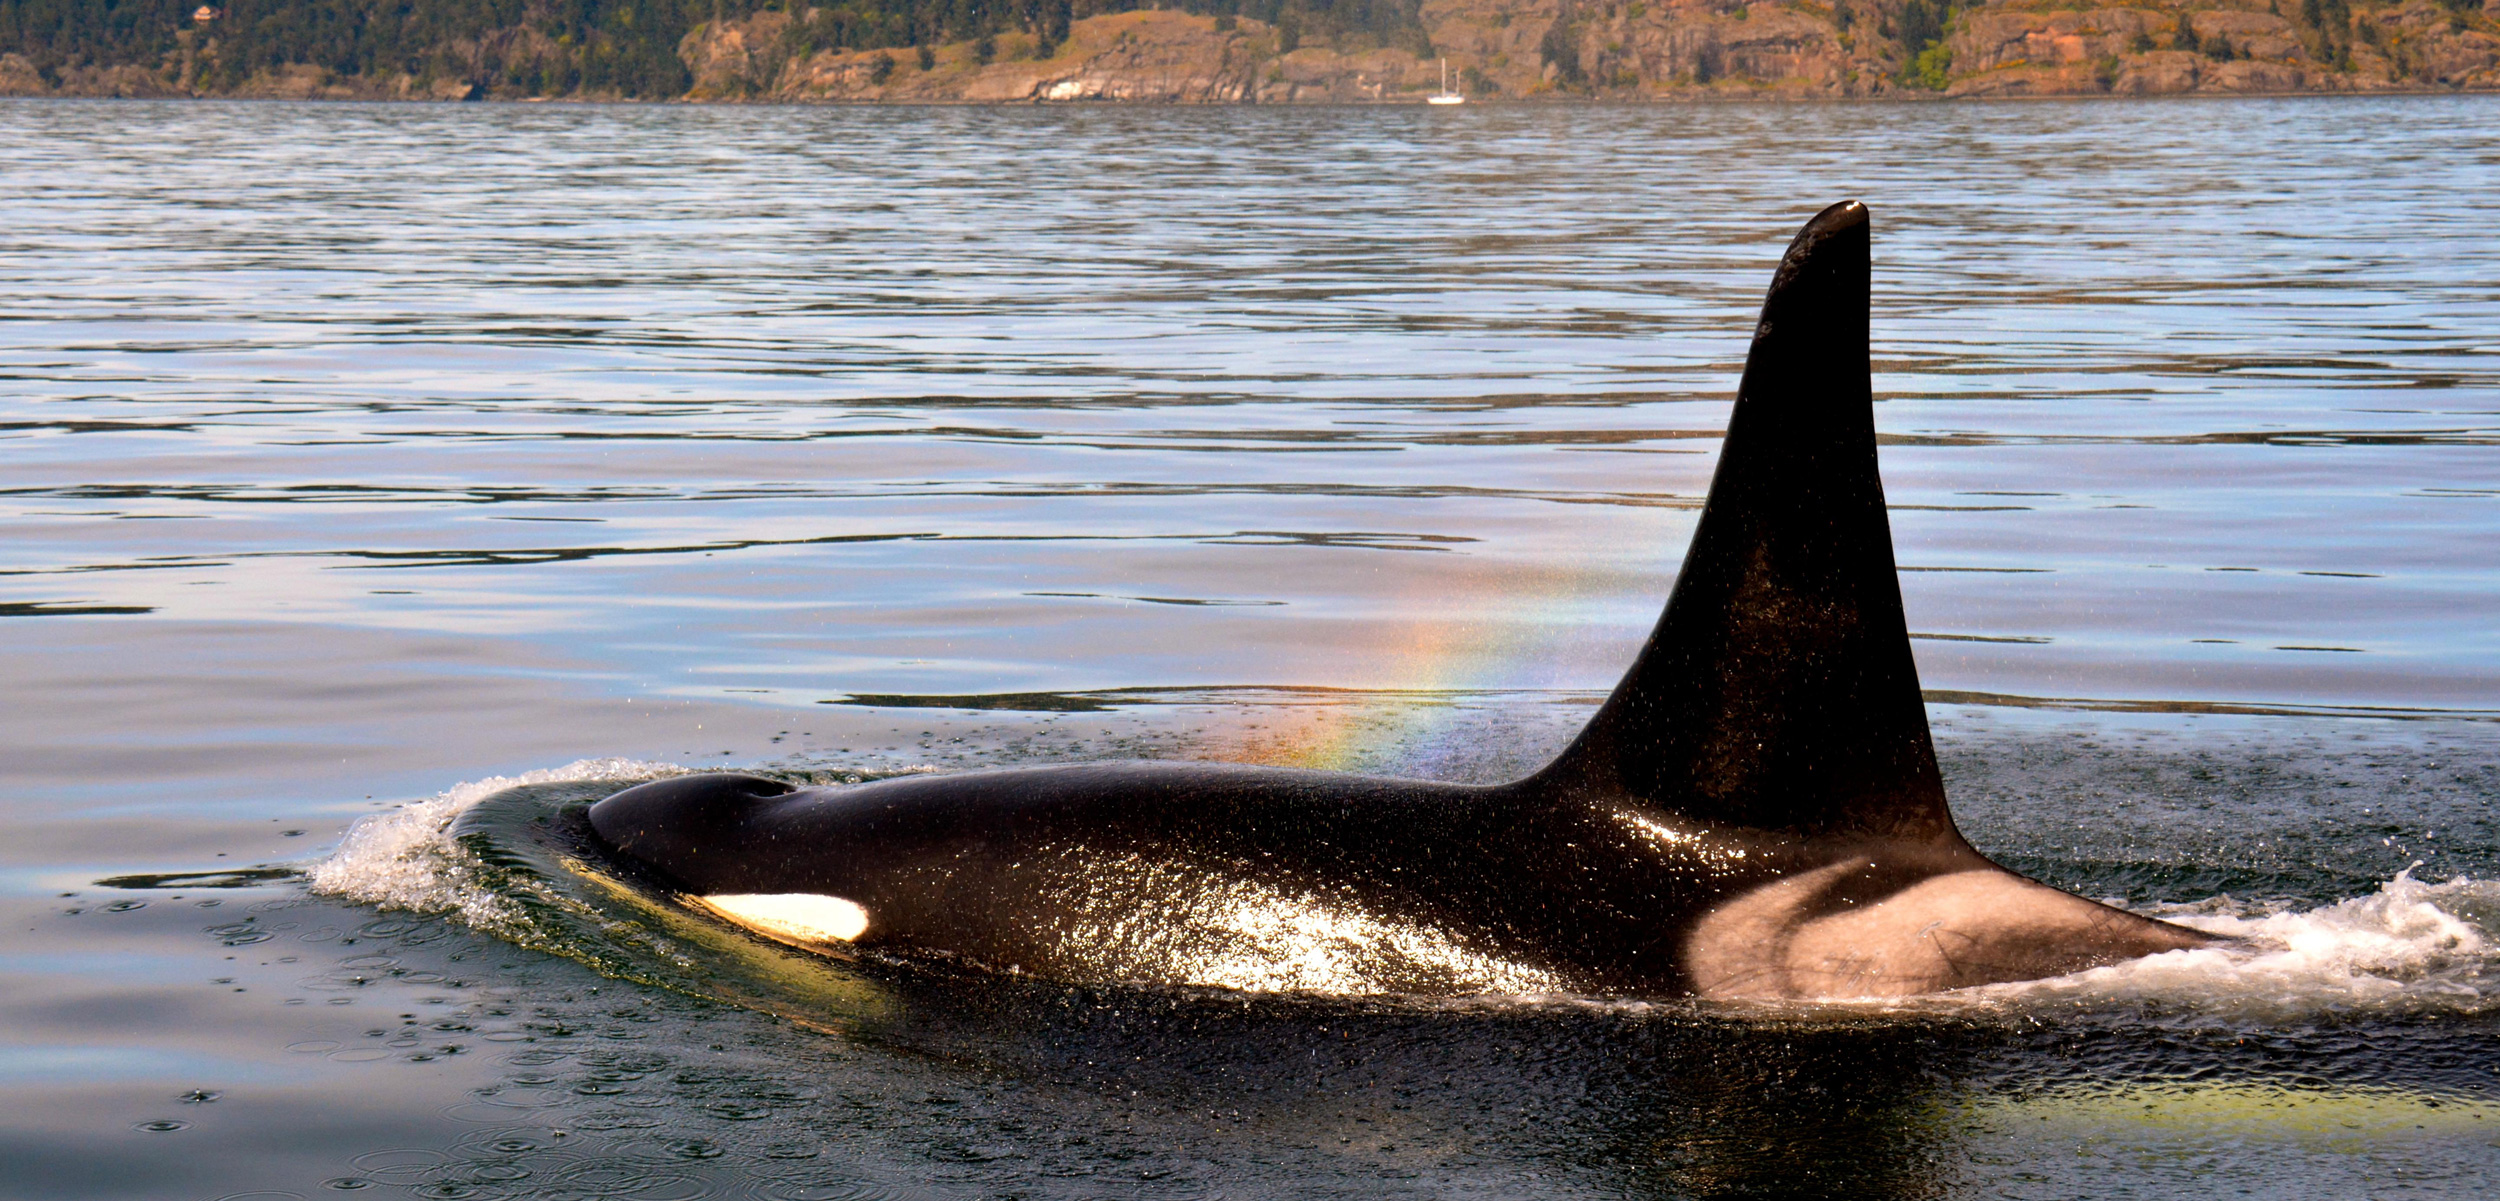 A southern resident killer whale in the Salish Sea